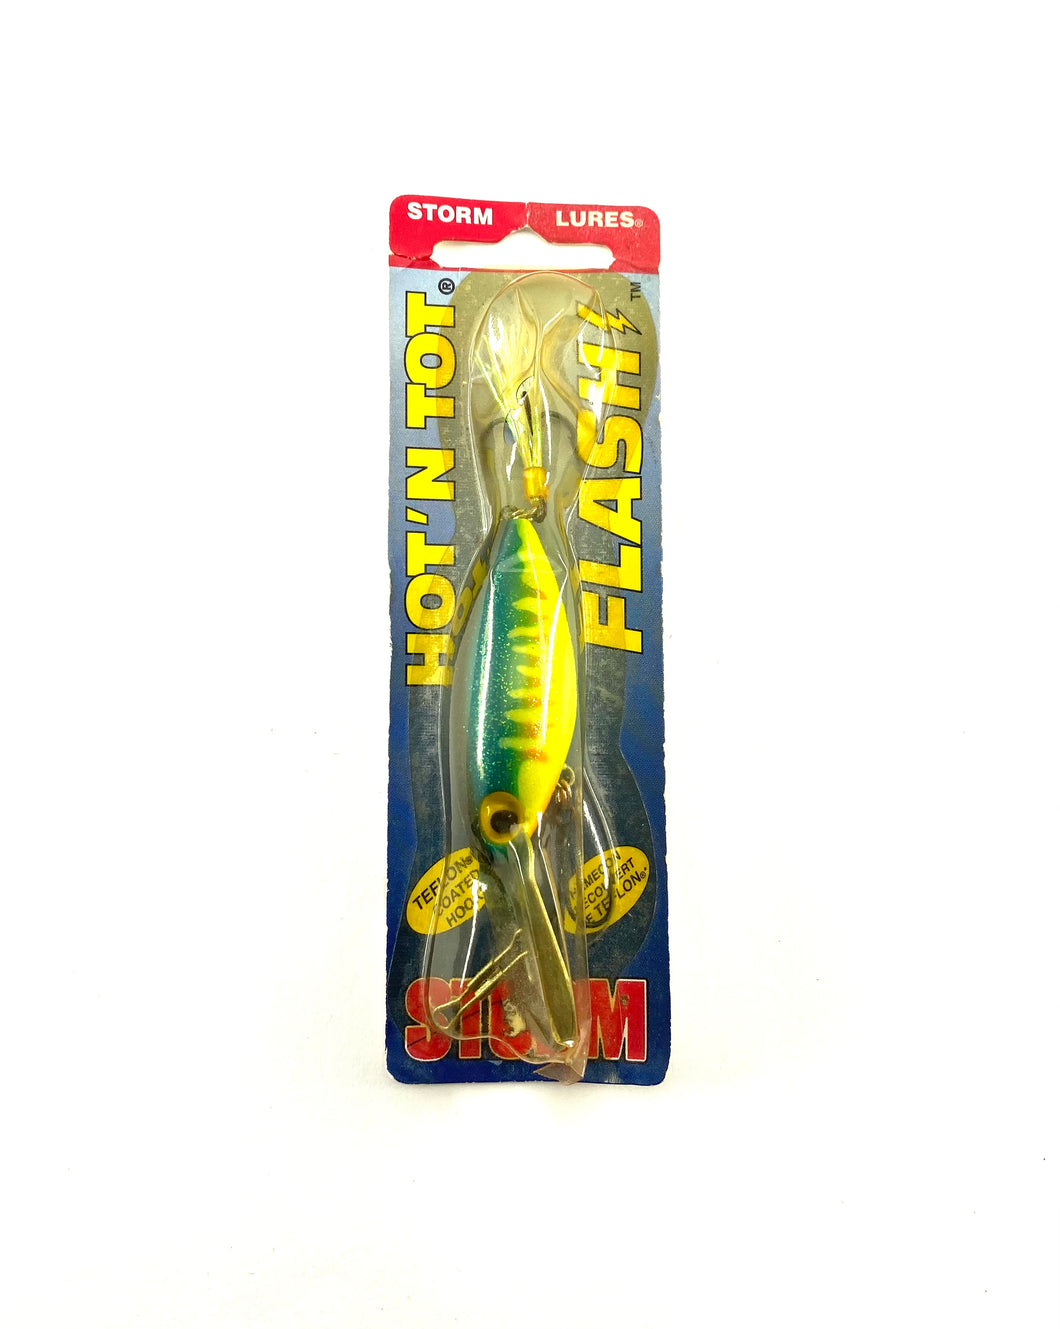 STORM LURES HOT'N TOT FLASH Fishing Lure in BLUE FIRE GLITZ